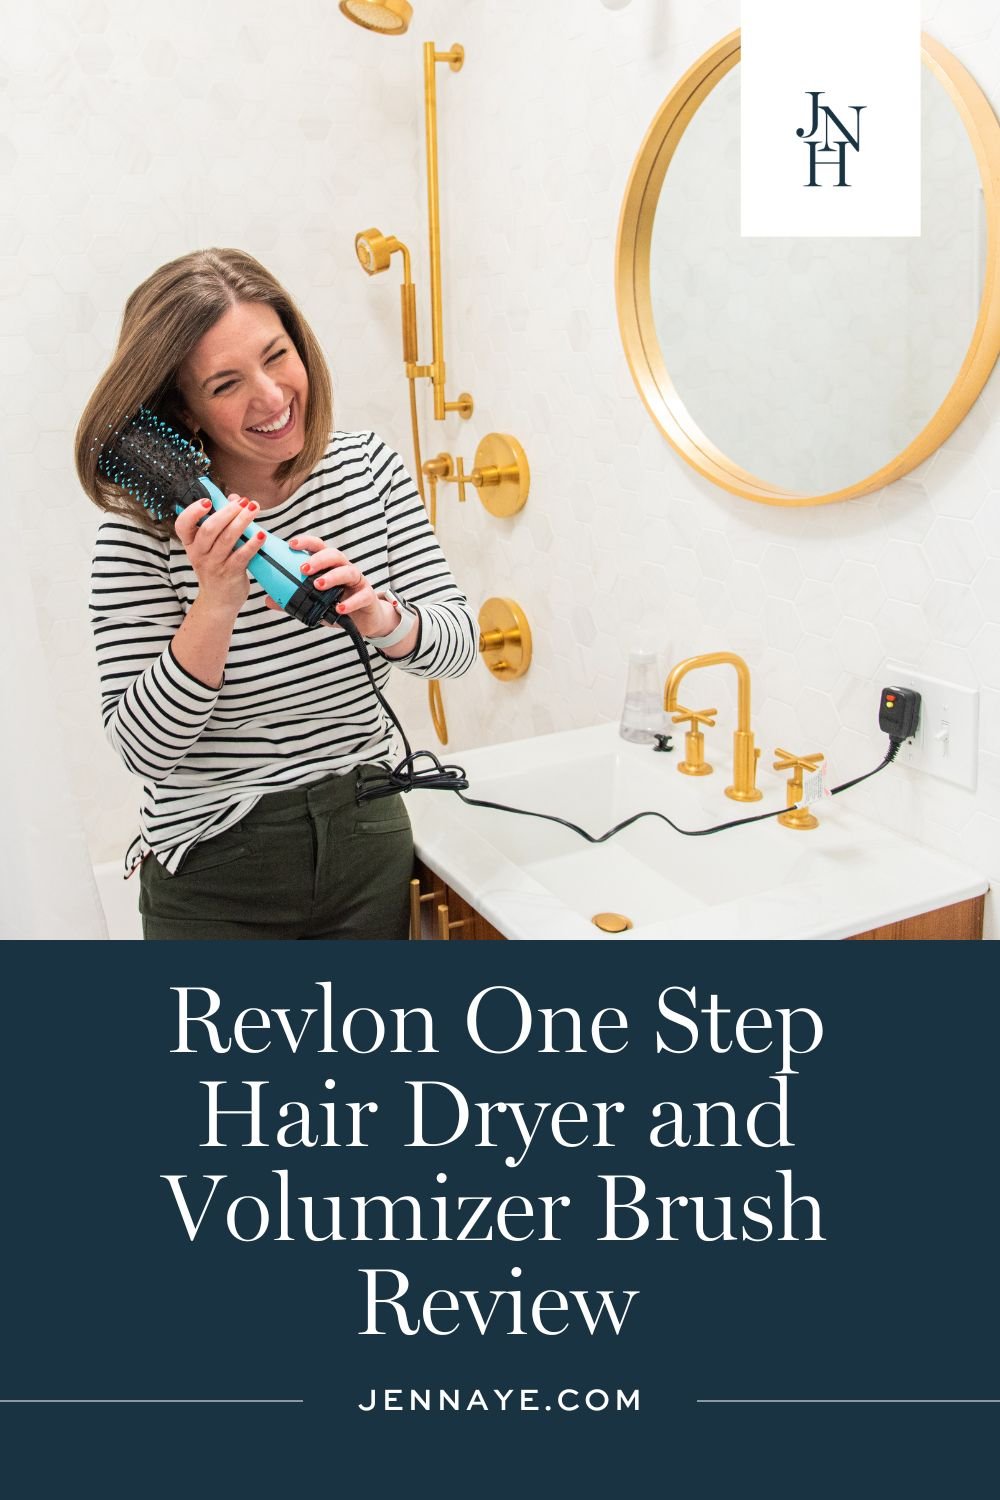 Revlon One-Step Hair Dryer and Styler Review: Quick and Effective